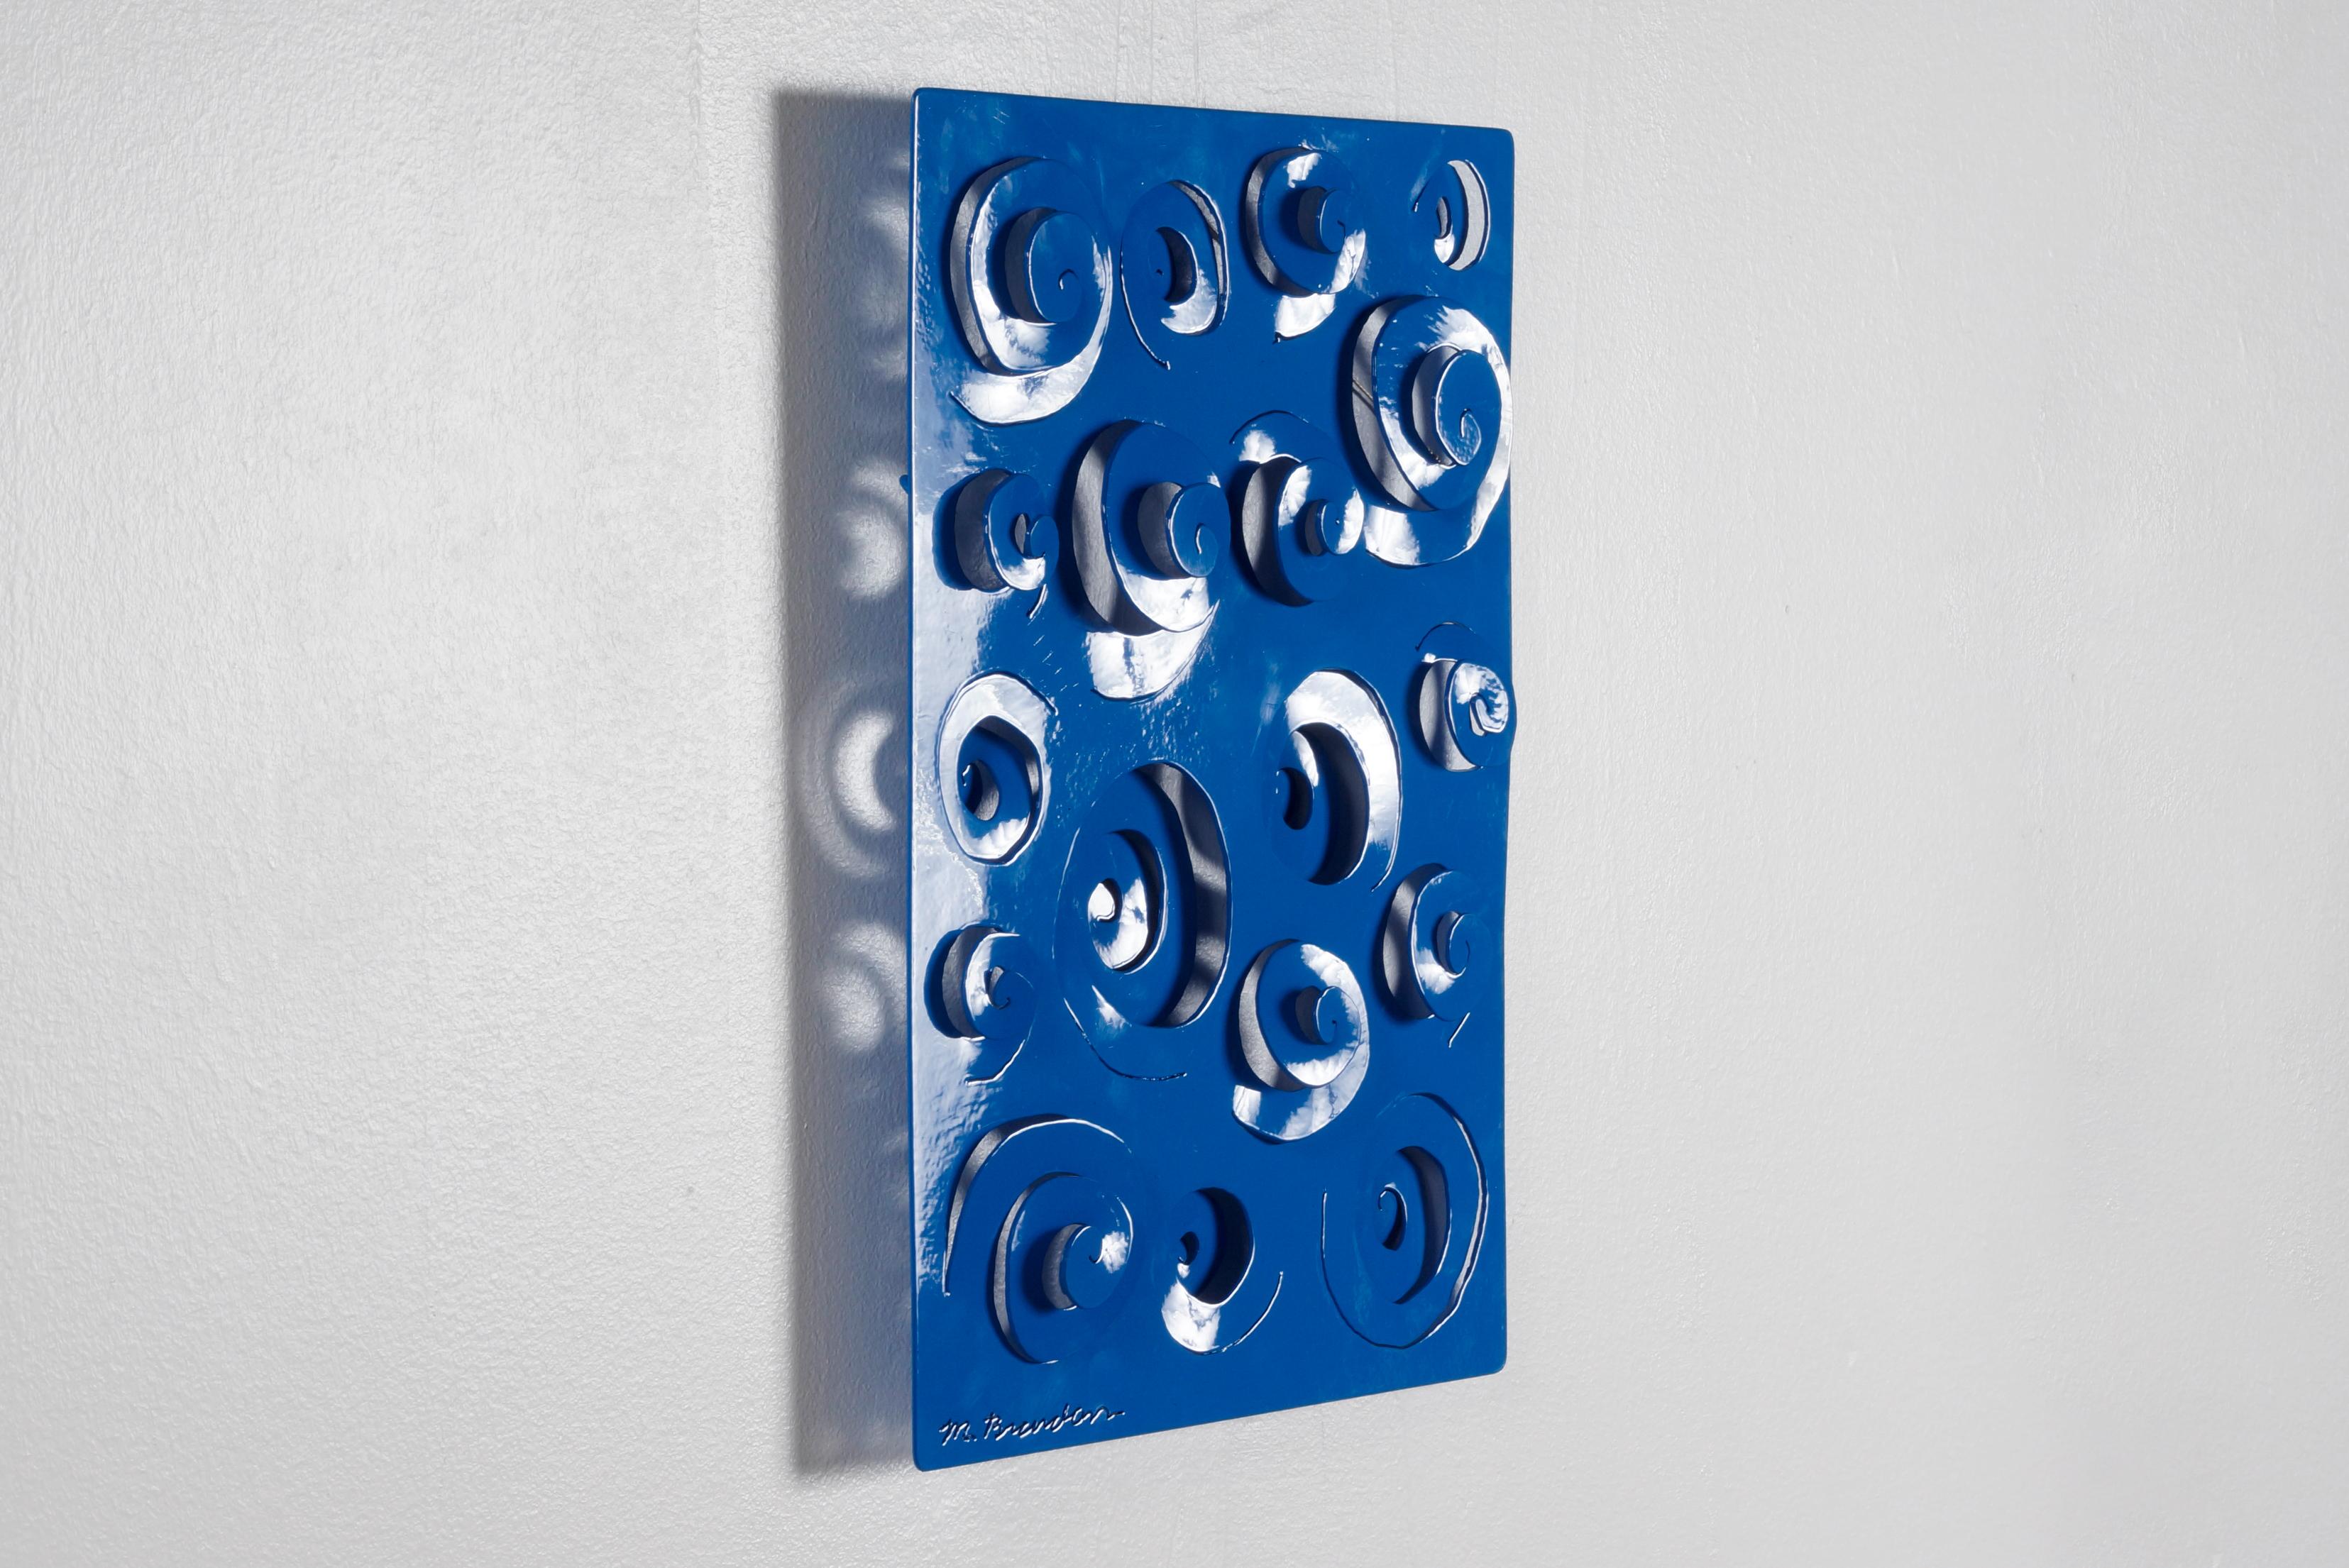 Found laser cut sheet metal wall hanging with optical swirl design. We reclaimed this piece with a new gloss blue powder coated finish. Signed M. Brandon, circa 1990s. One of a kind. 

Dimensions: 14